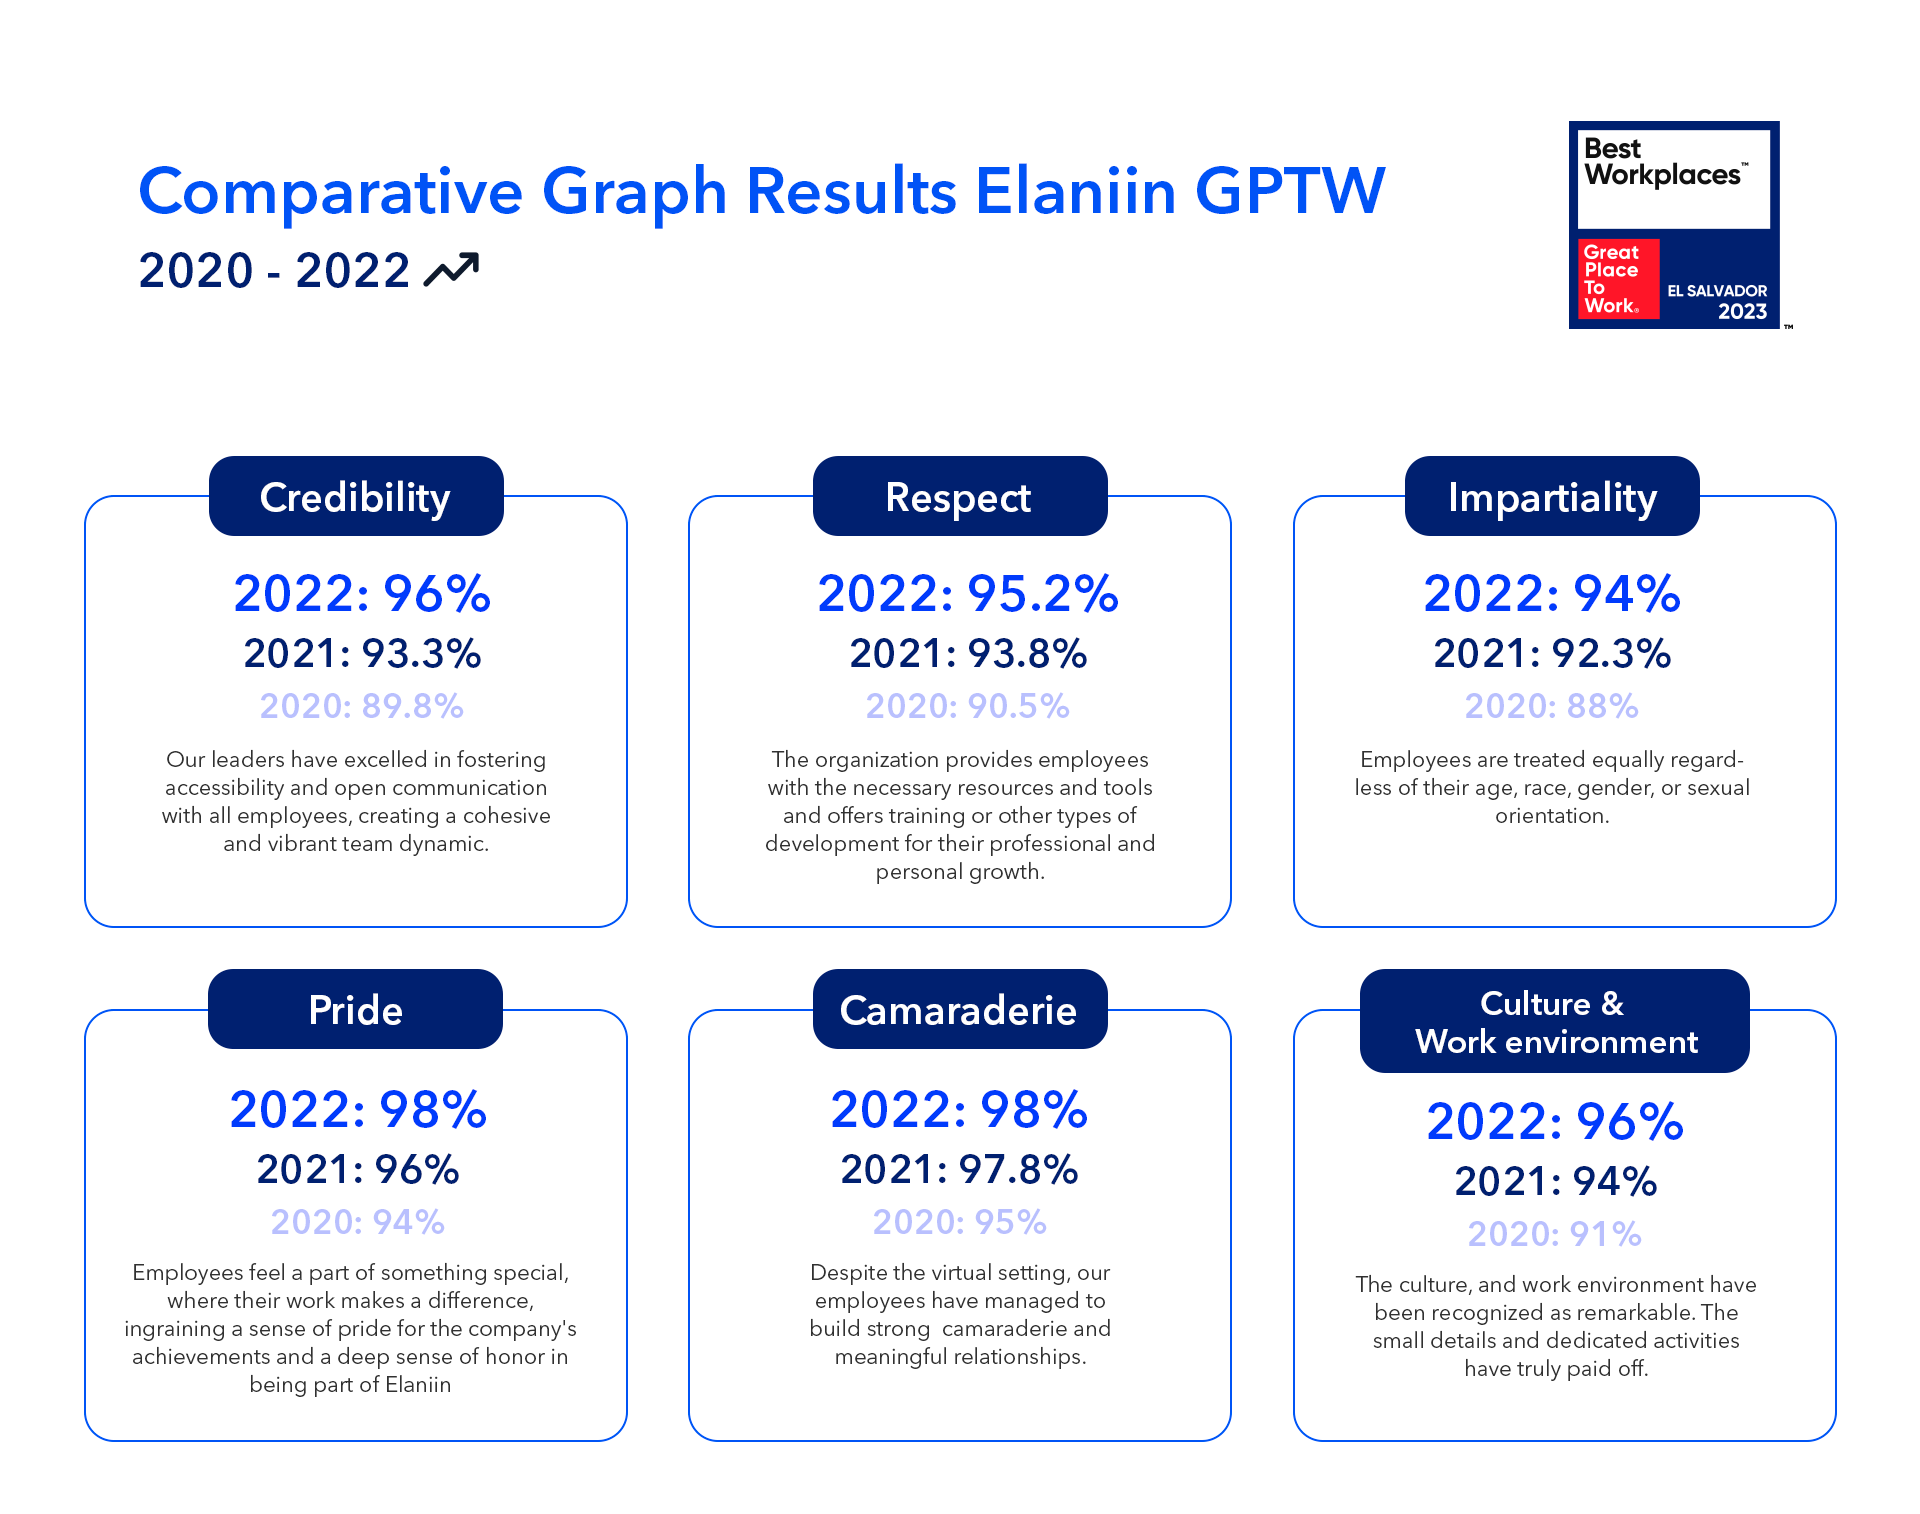 Comparative Graph Resulte of the Elaniin GPTW Results throughout the years 2020-2022, in the dimensions of Credibility, Respect, Impartiality, Pride, Camaraderie, and Culture & Work environment